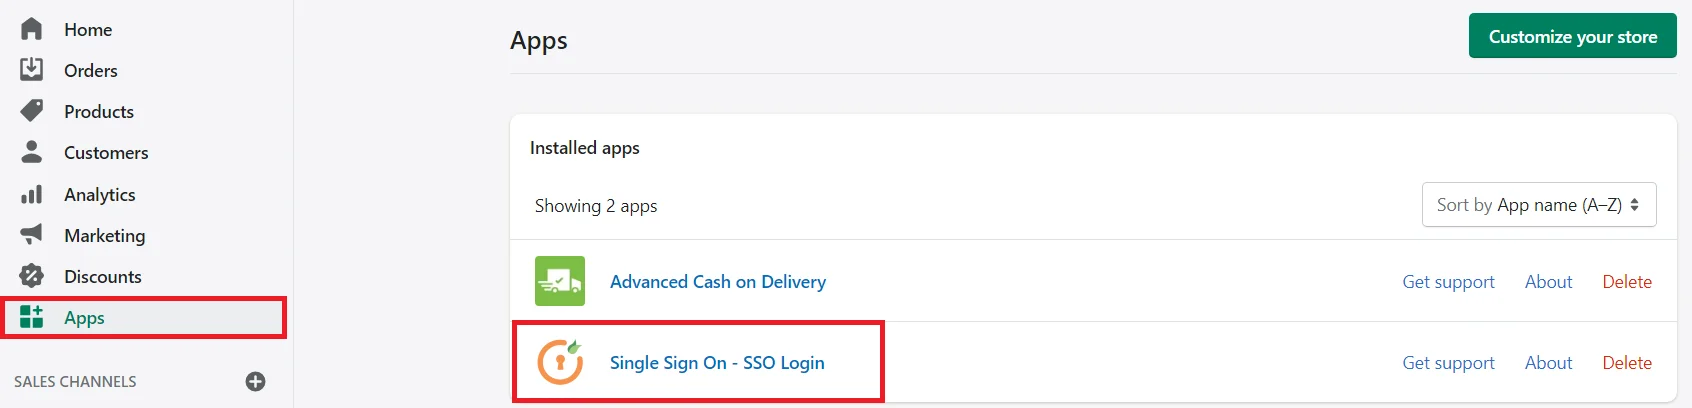 Single Sign-On (SSO)for Shopify (Plus and Non Plus), Configure IDP for enabling Single Sign-On (SSO)